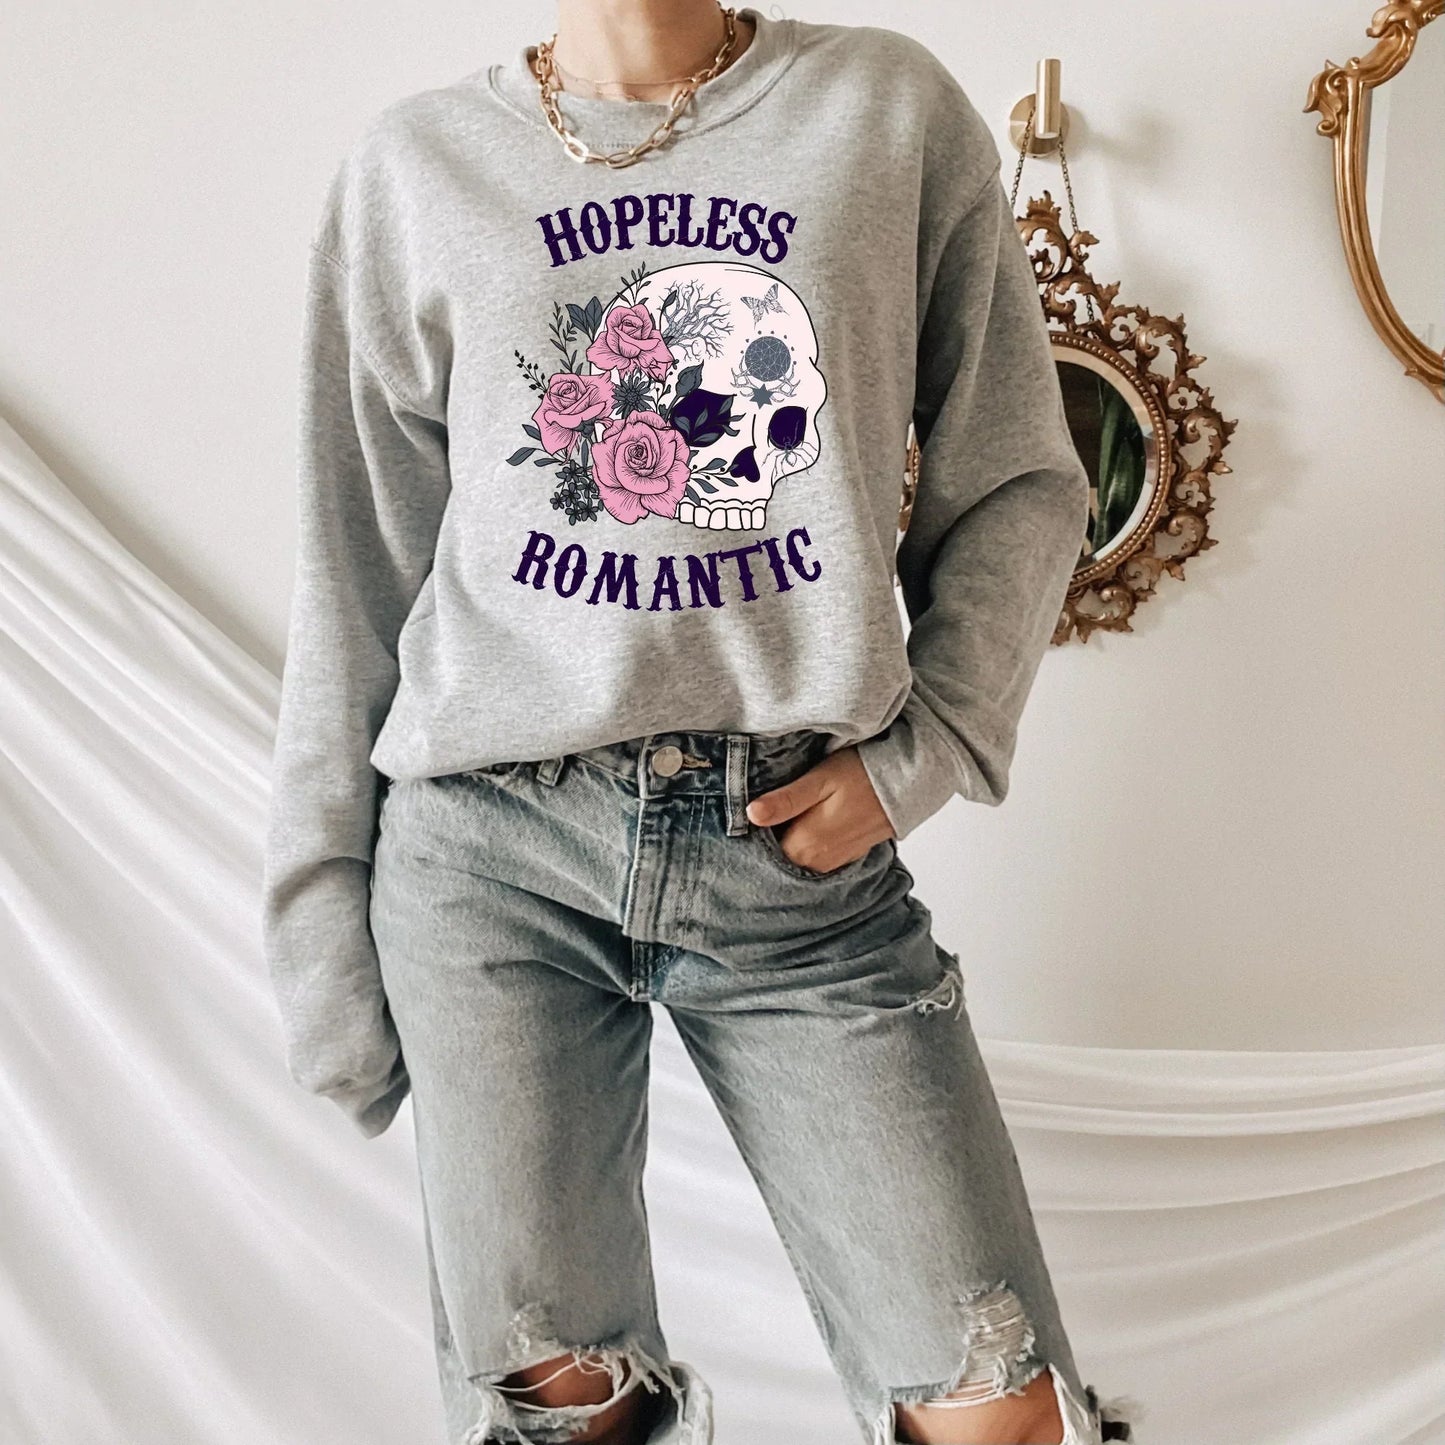 Gothic Shirt, Pastel Halloween Sweatshirt, Witchy Vibes, Skull Shirt Dead Roses Shirt, Magical Witch Shirt, Pastel Goth Style, EMO Tshirt HMDesignStudioUS